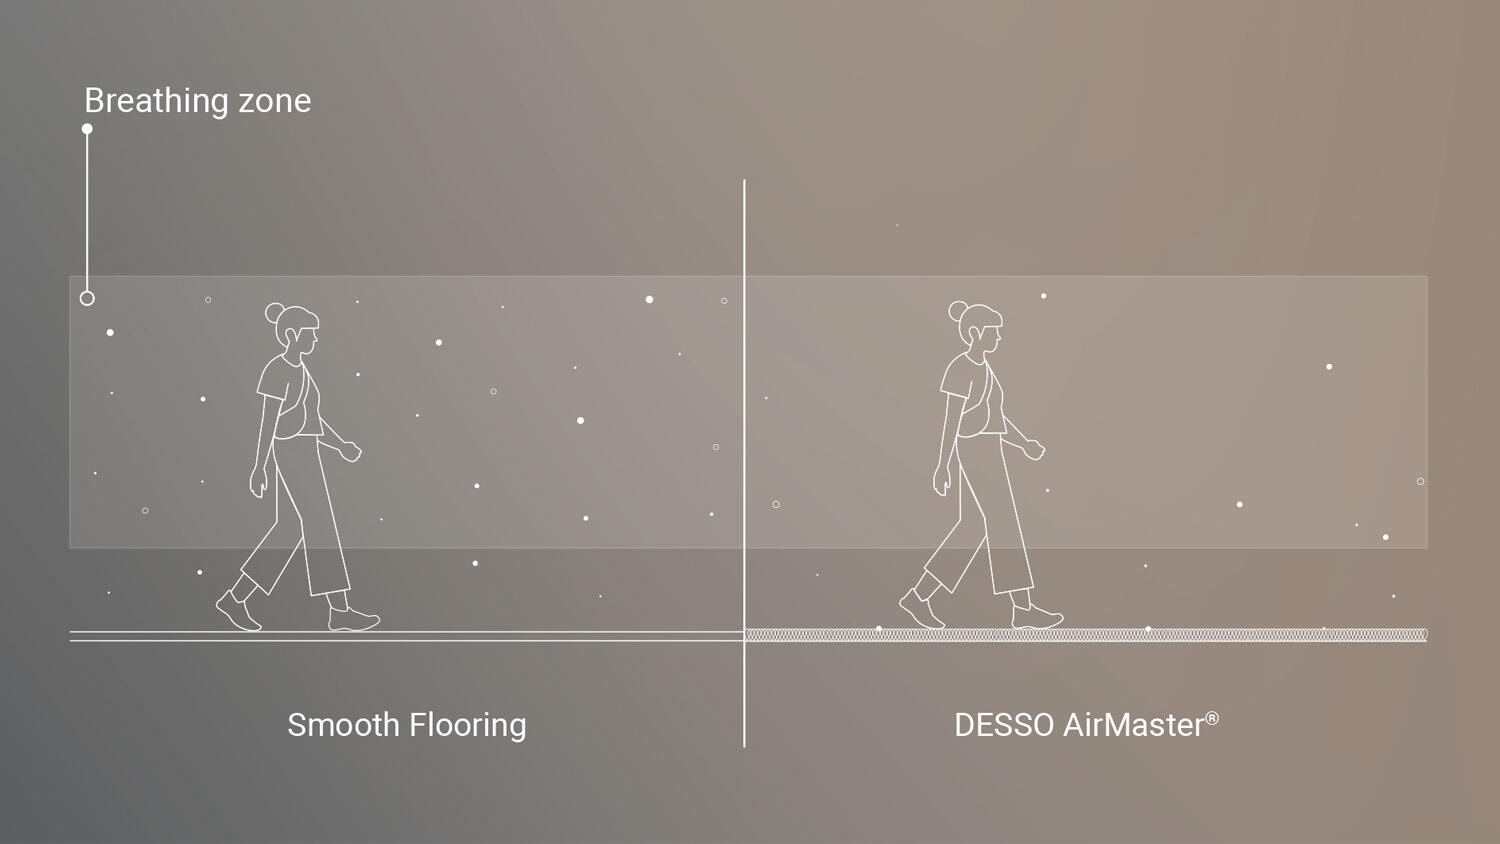 Reduced amount of fine dust in the breathing zone when using DESSO AirMaster carpet tiles compared to smooth floors